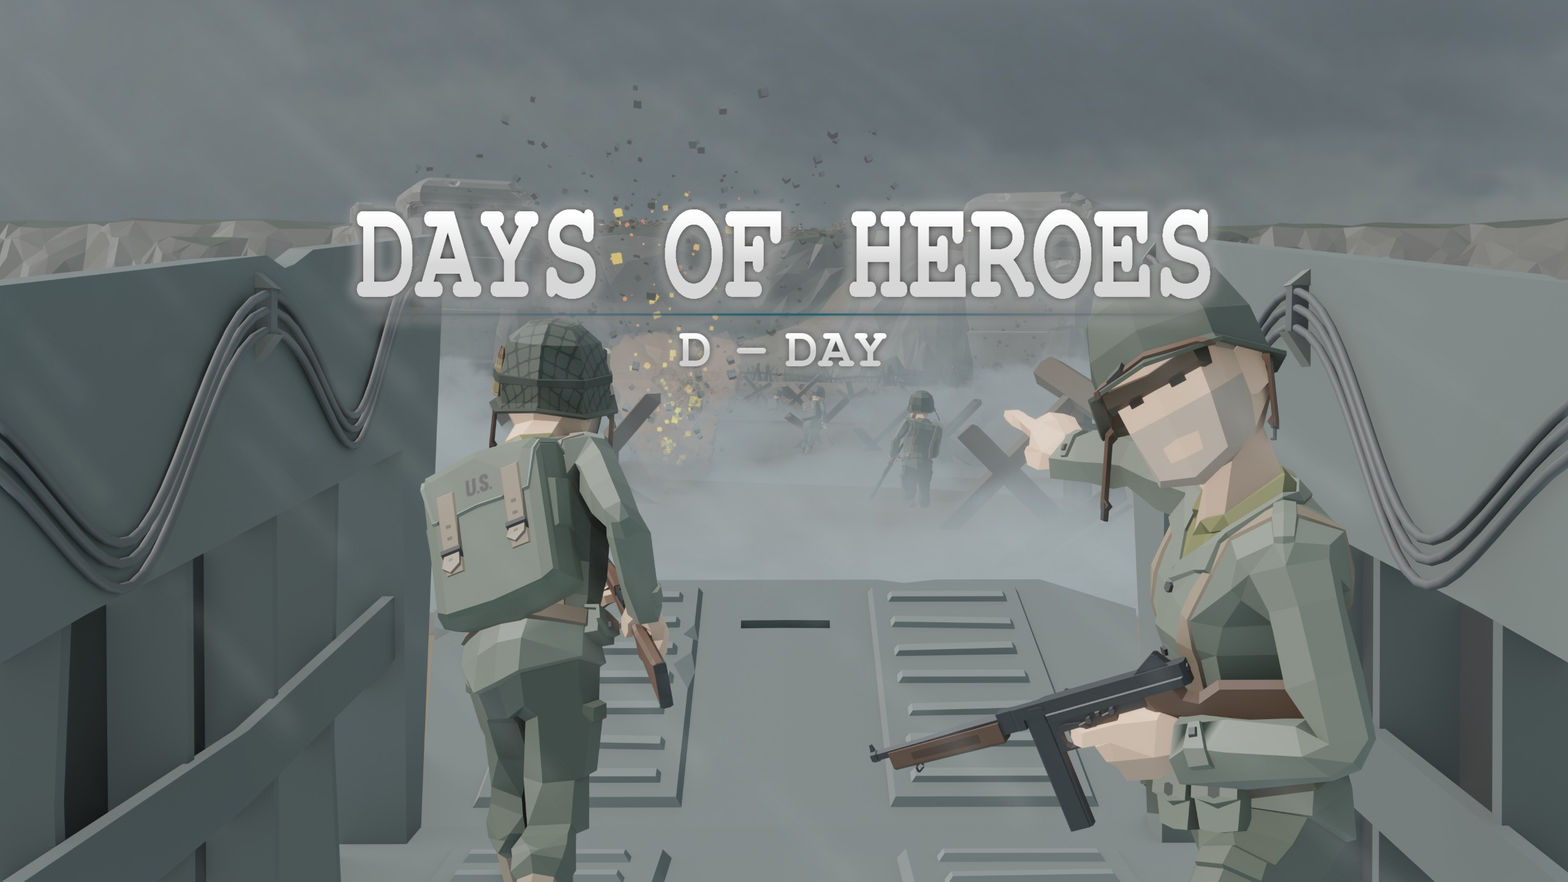 Days of Heroes: D-Day